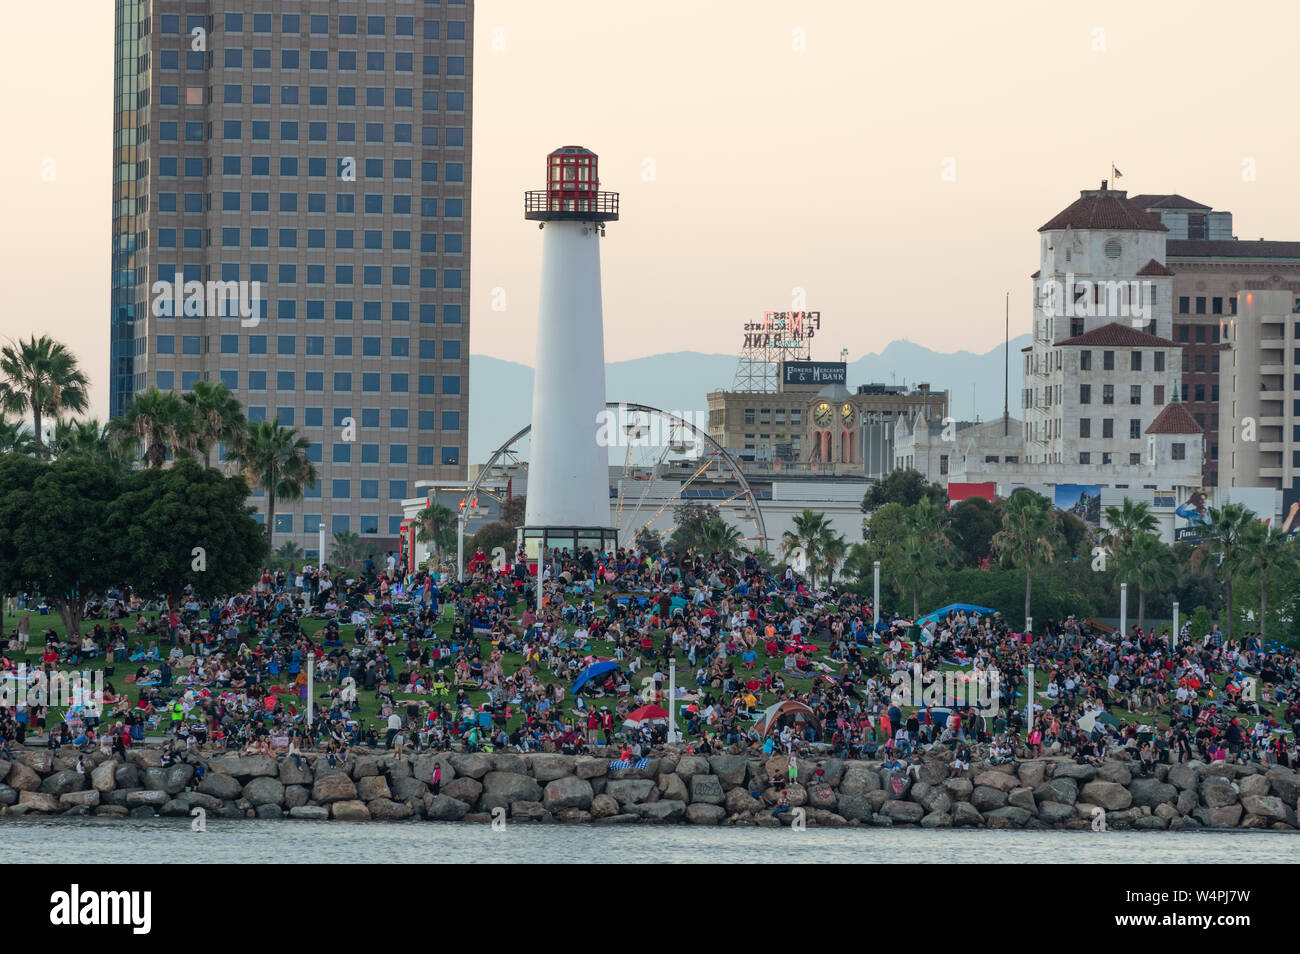 Large crowd of people in Long Beach, California, shown celebrating Independence Day, July 4th, 2016. Stock Photo